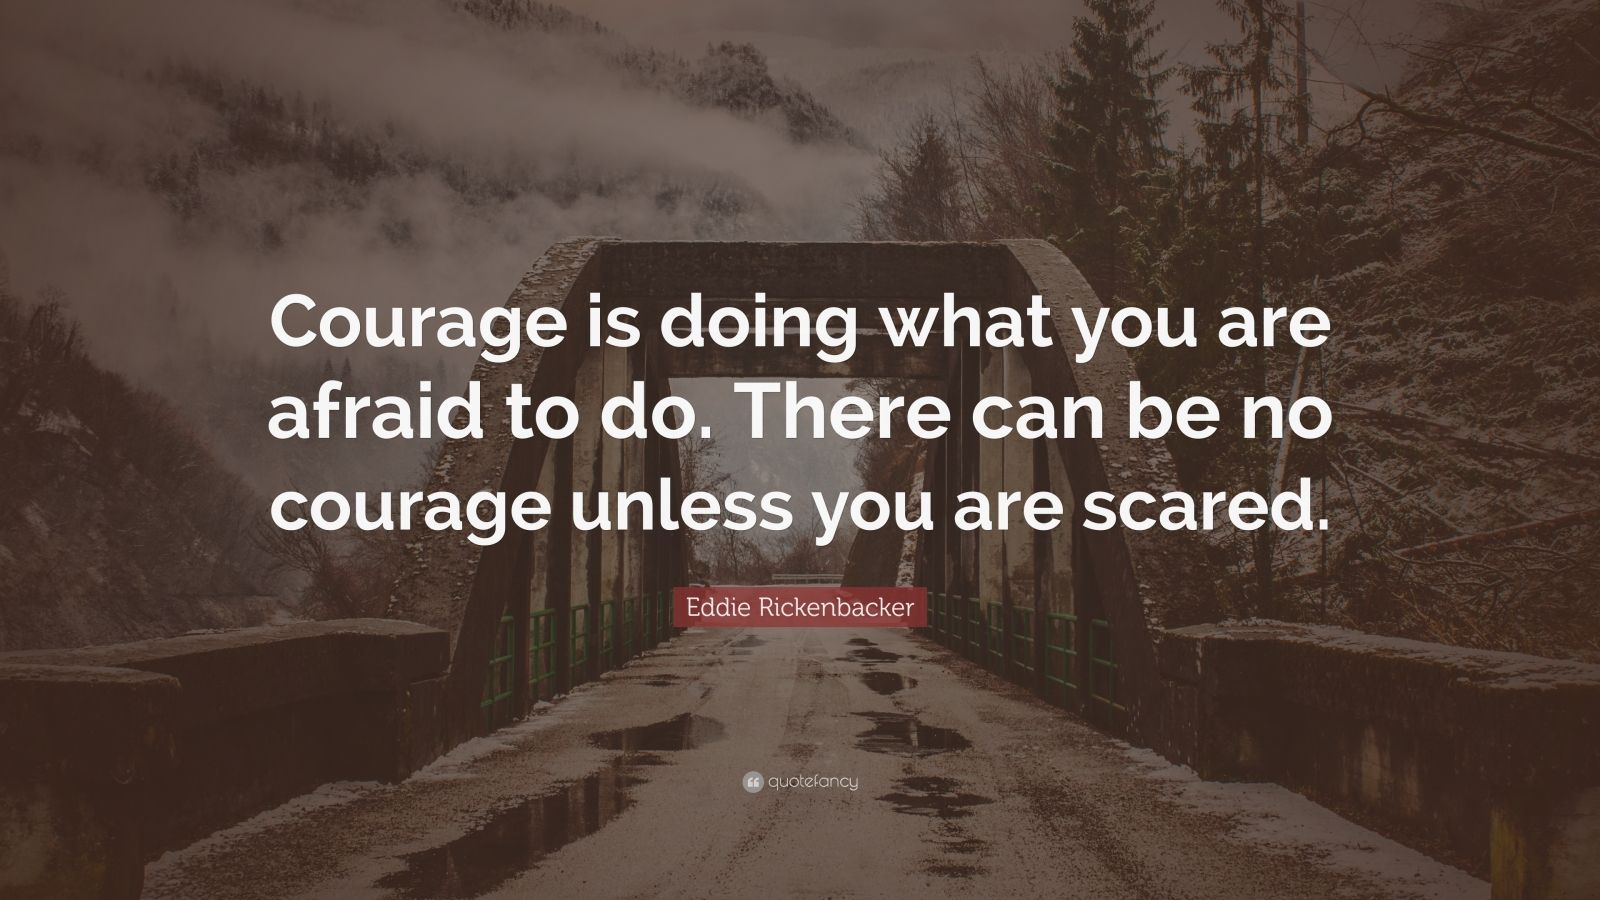 Eddie Rickenbacker Quote: “Courage is doing what you are afraid to do ...